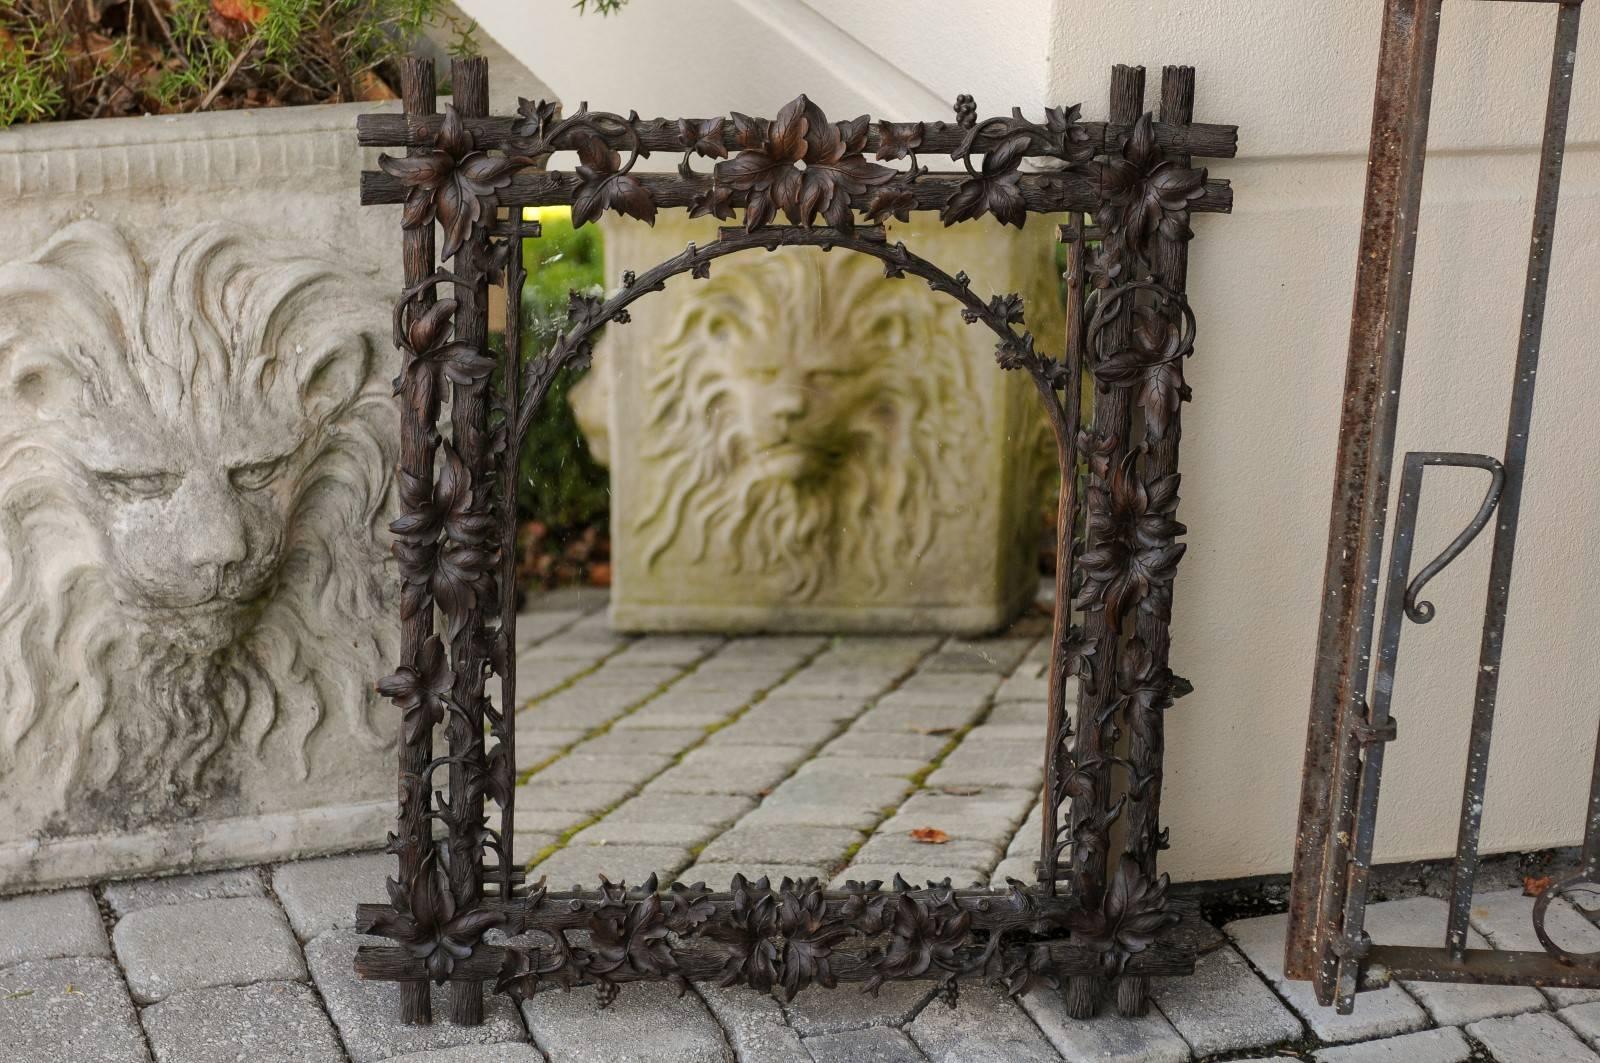 A German Black Forest wooden carved mirror with foliage motifs from the turn of the century. This German mirror was born in the early 1900s, and features an exquisite carved frame imitating branches around which are intertwined delicate vine leaves.